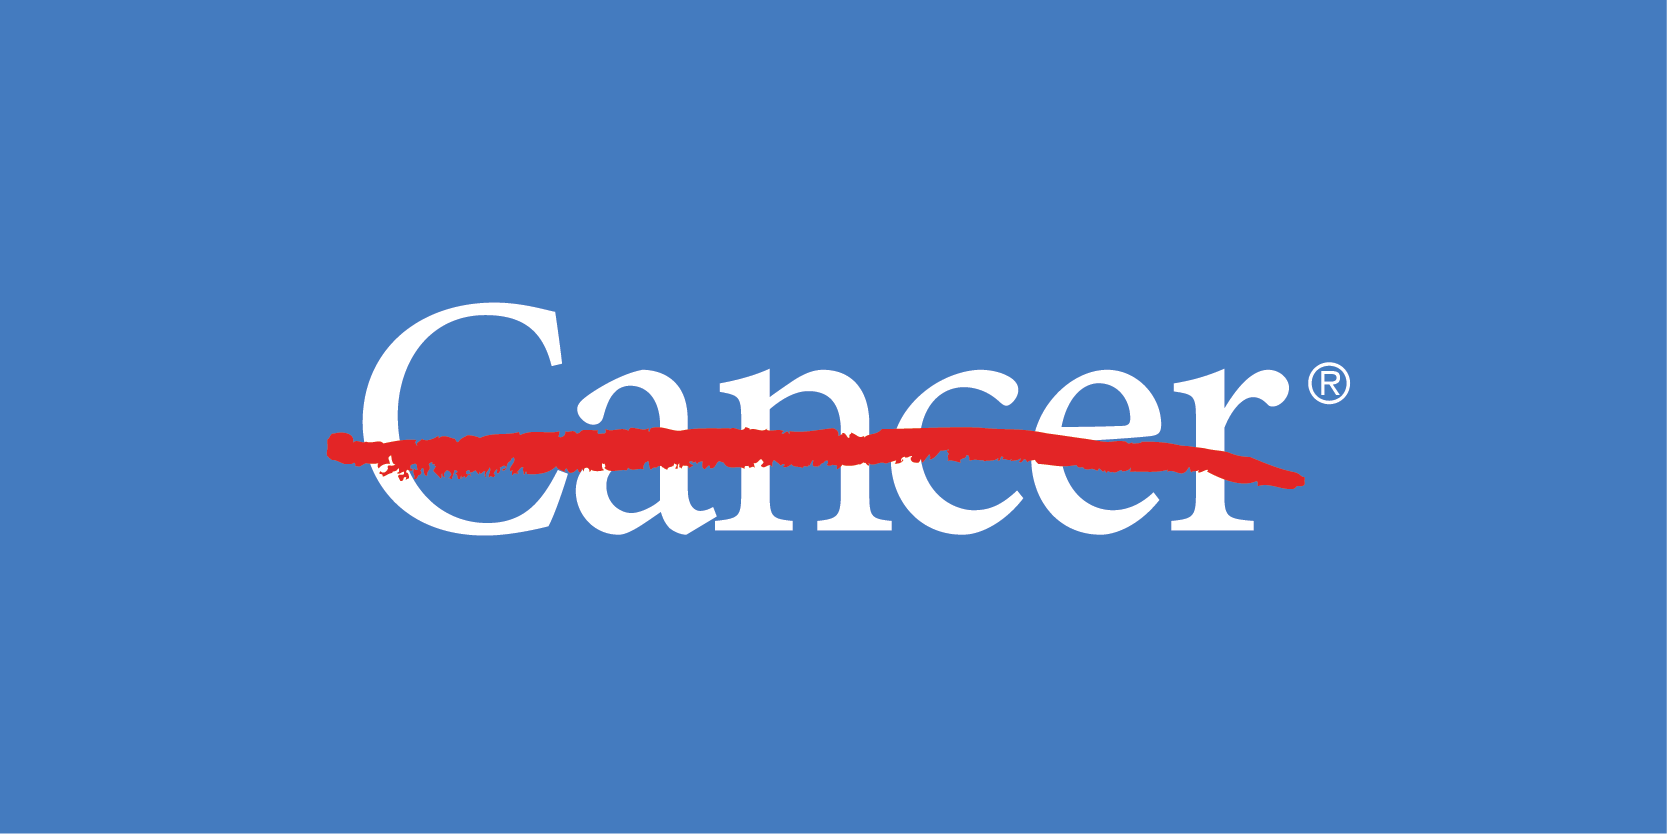 Canser Logo - Cancer Treatment & Cancer Research Hospital. MD Anderson Cancer Center